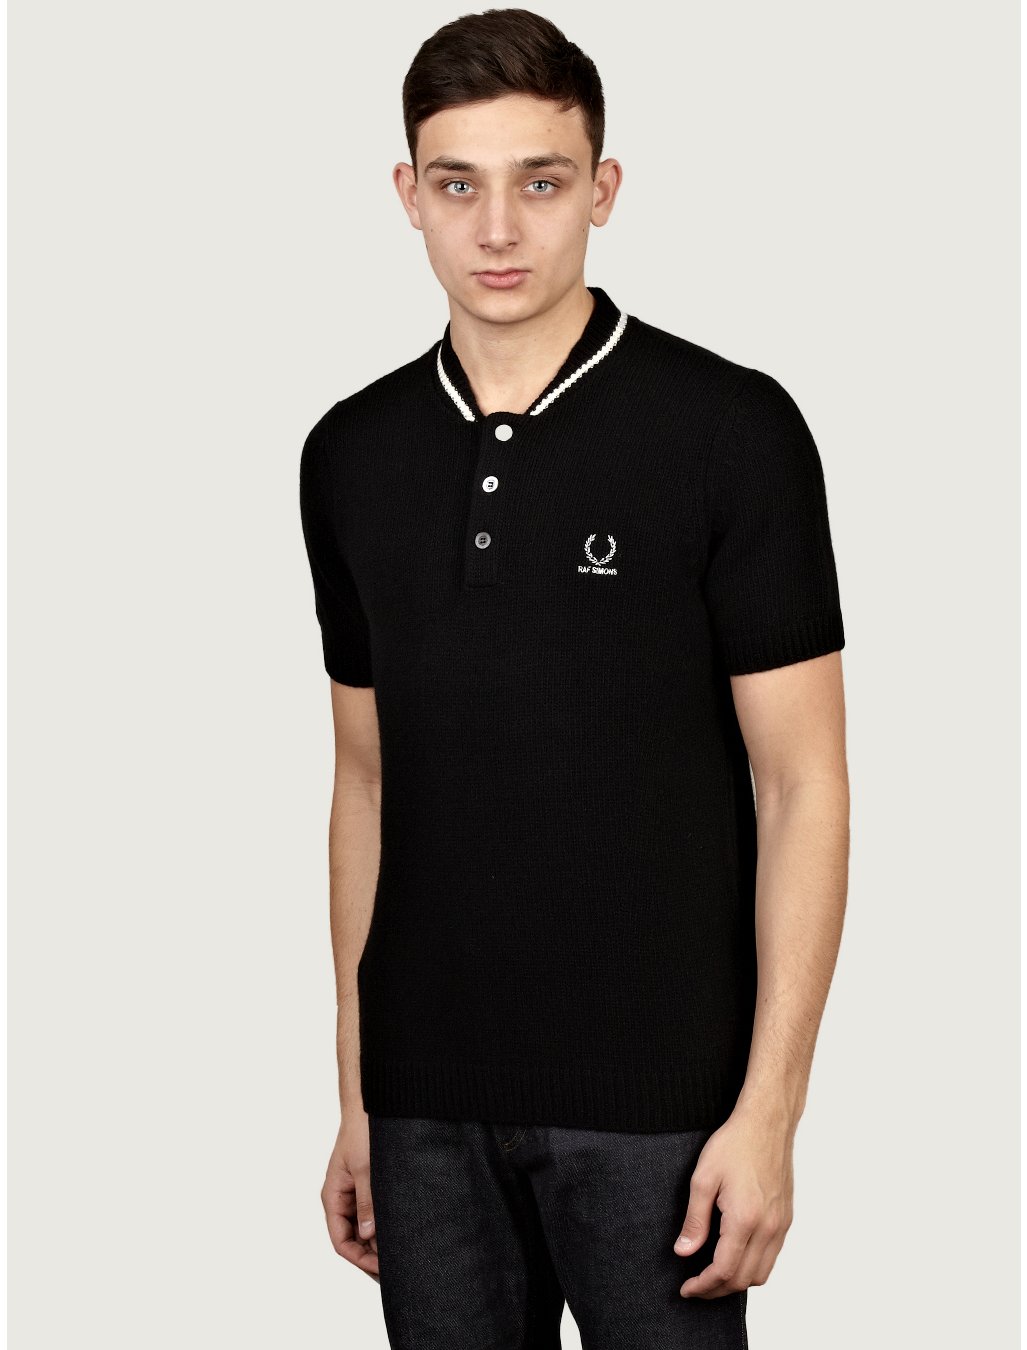 Fred Perry By Raf Simons Mens Black Knitted Polo Shirt in Black for Men ...